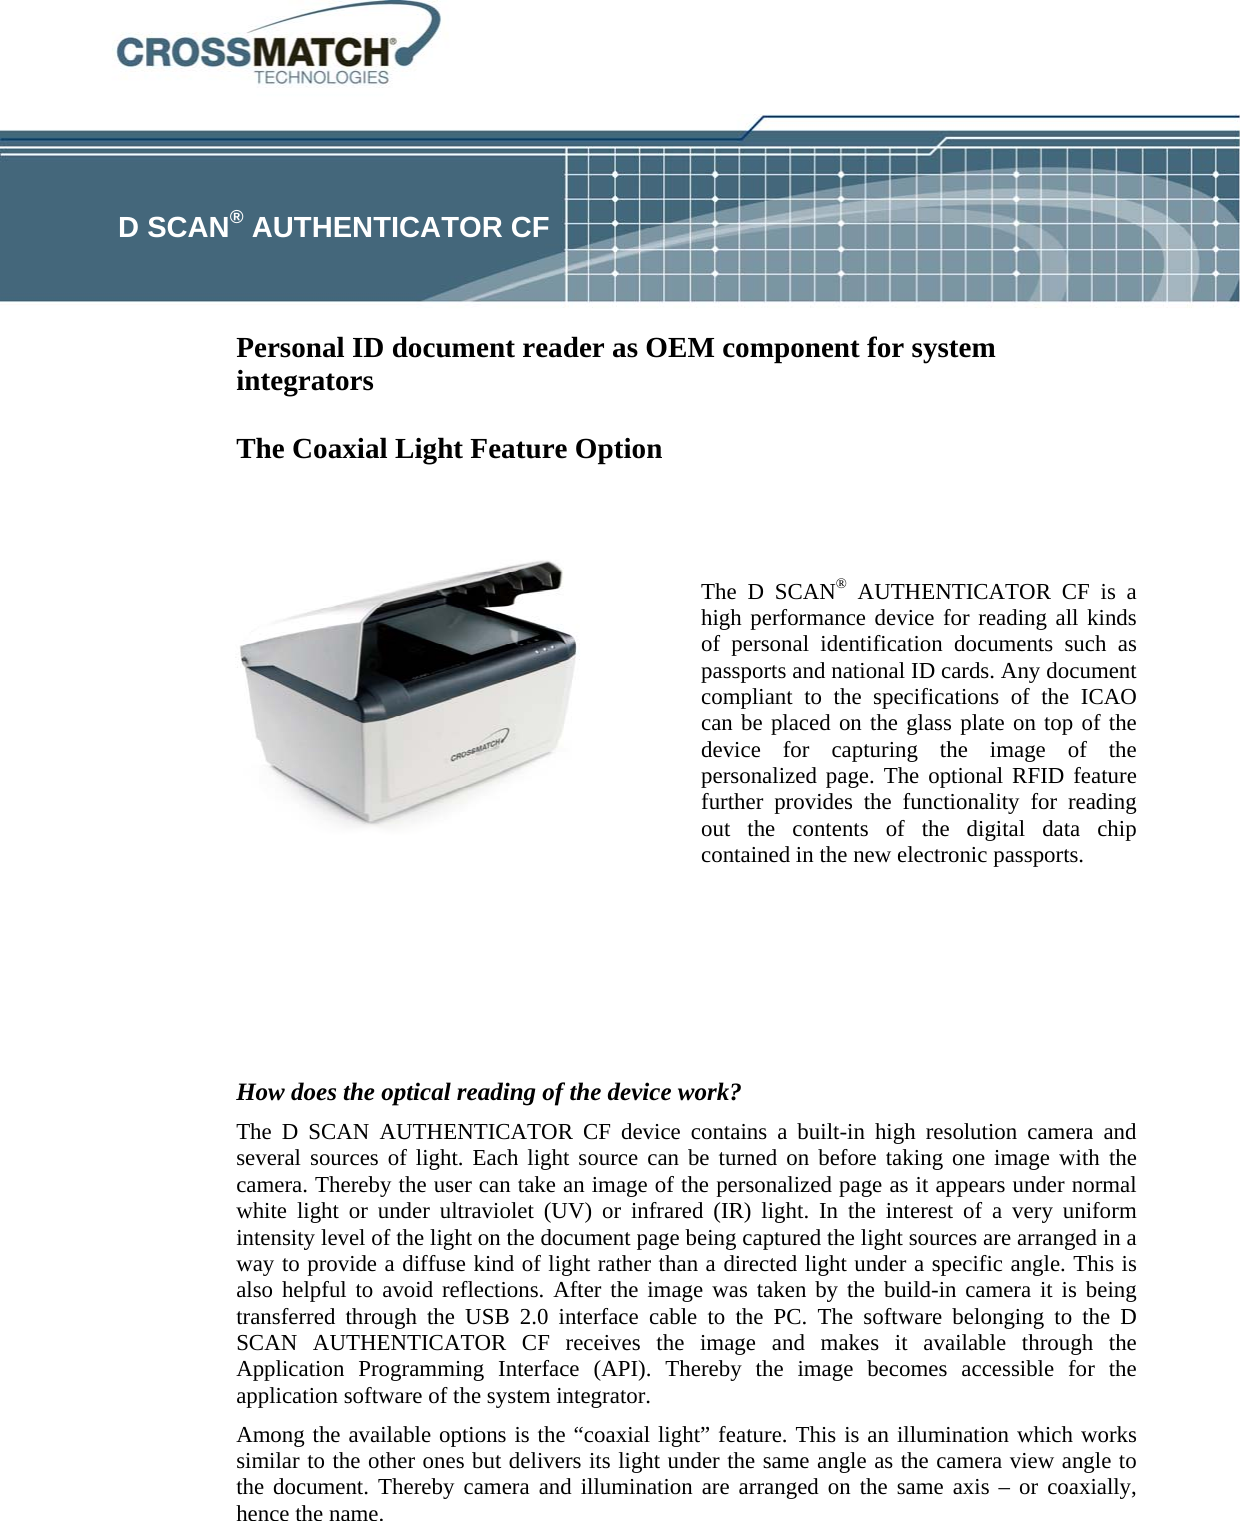    D SCAN® AUTHENTICATOR CF  Personal ID document reader as OEM component for system integrators   The Coaxial Light Feature Option   The D SCAN® AUTHENTICATOR CF is a high performance device for reading all kinds of personal identification documents such as passports and national ID cards. Any document compliant to the specifications of the ICAO can be placed on the glass plate on top of the device for capturing the image of the personalized page. The optional RFID feature further provides the functionality for reading out the contents of the digital data chip contained in the new electronic passports.    How does the optical reading of the device work? The D SCAN AUTHENTICATOR CF device contains a built-in high resolution camera and several sources of light. Each light source can be turned on before taking one image with the camera. Thereby the user can take an image of the personalized page as it appears under normal white light or under ultraviolet (UV) or infrared (IR) light. In the interest of a very uniform intensity level of the light on the document page being captured the light sources are arranged in a way to provide a diffuse kind of light rather than a directed light under a specific angle. This is also helpful to avoid reflections. After the image was taken by the build-in camera it is being transferred through the USB 2.0 interface cable to the PC. The software belonging to the D SCAN AUTHENTICATOR CF receives the image and makes it available through the Application Programming Interface (API). Thereby the image becomes accessible for the application software of the system integrator. Among the available options is the “coaxial light” feature. This is an illumination which works similar to the other ones but delivers its light under the same angle as the camera view angle to the document. Thereby camera and illumination are arranged on the same axis – or coaxially, hence the name. 